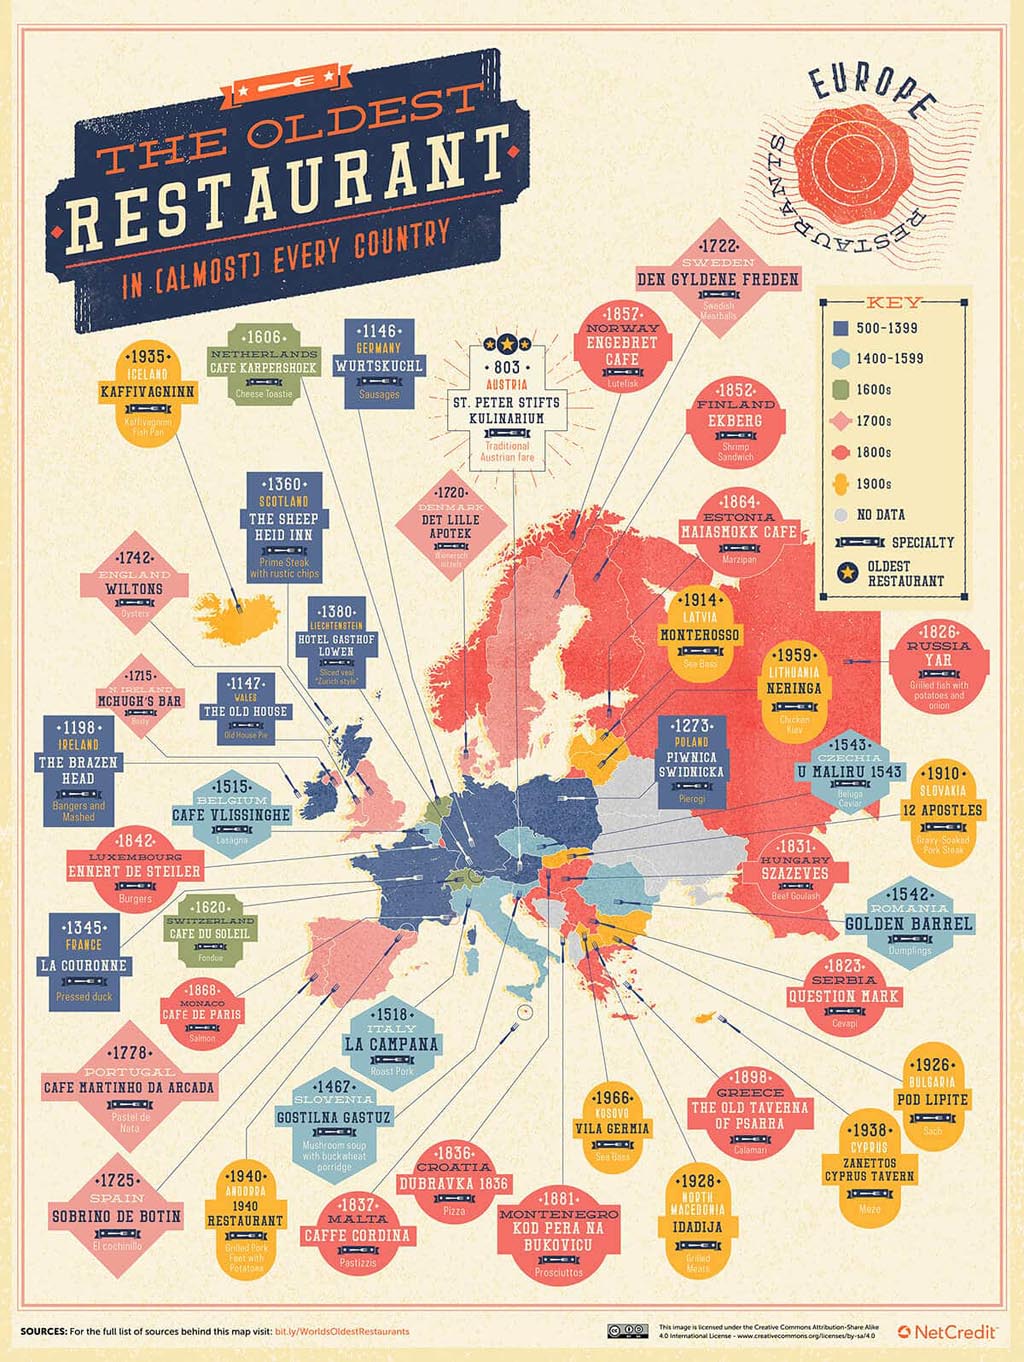 Oldest operating restaurant of every country